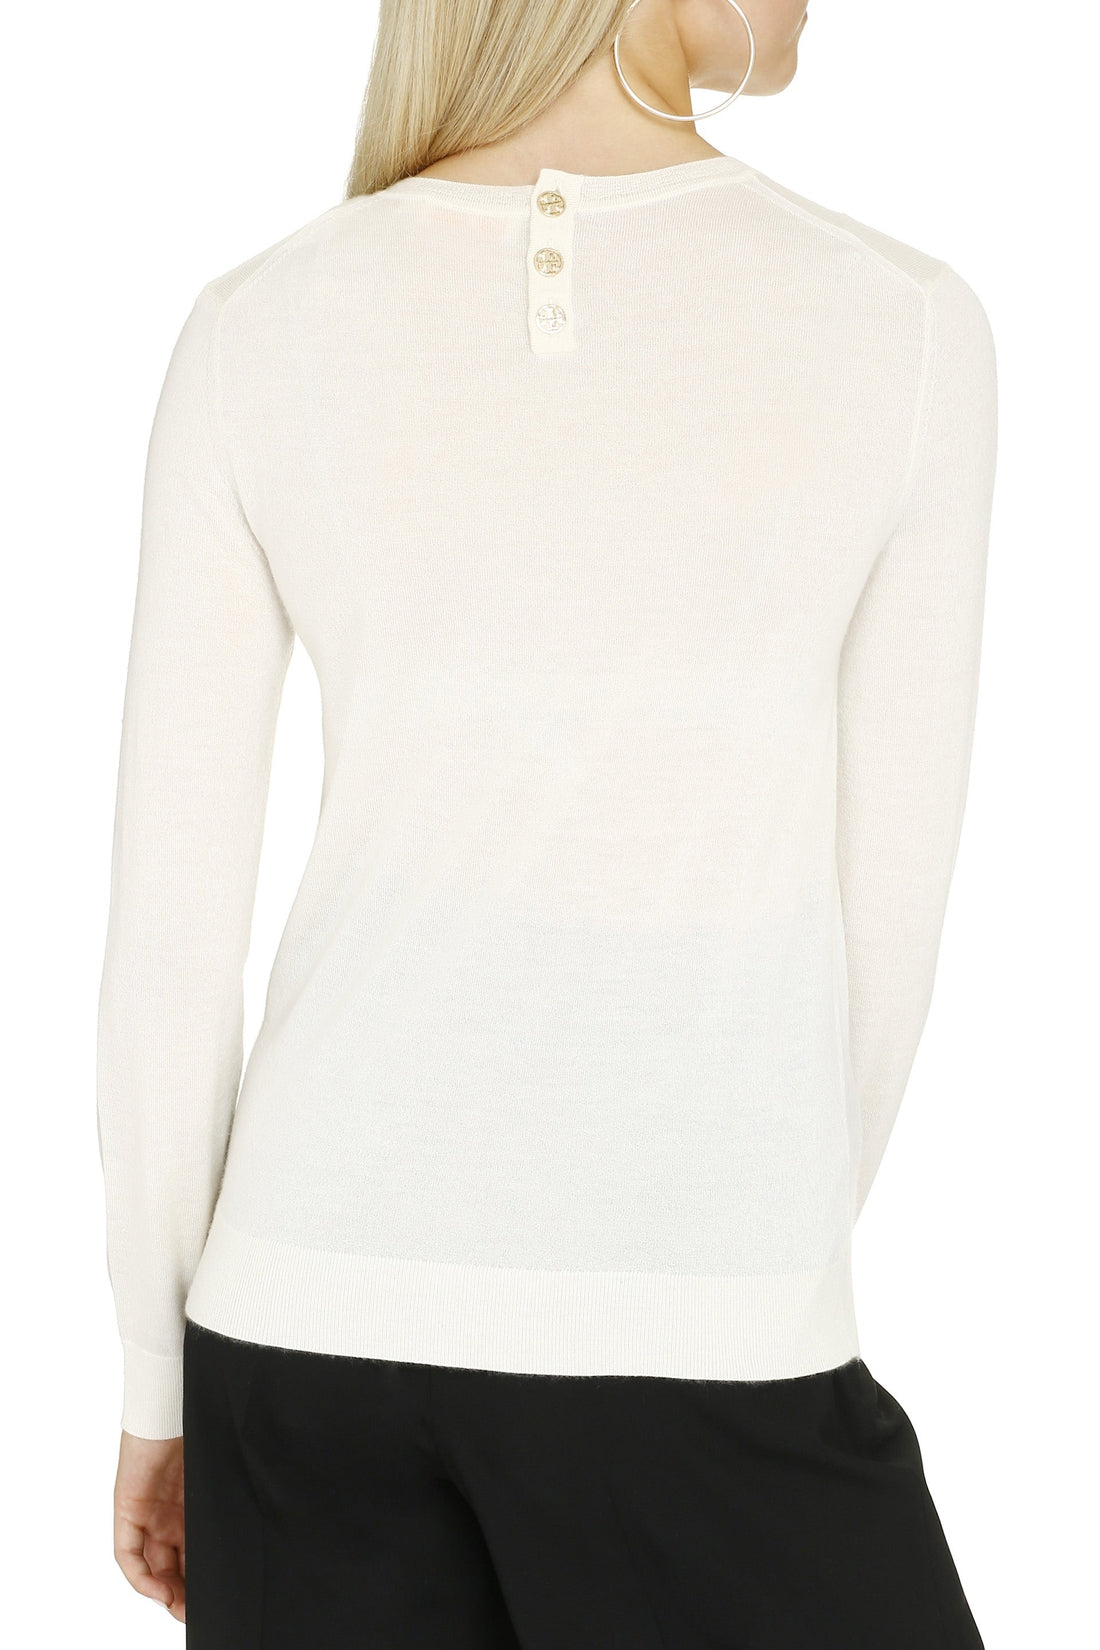 Tory Burch-OUTLET-SALE-Iberia cashmere sweater-ARCHIVIST